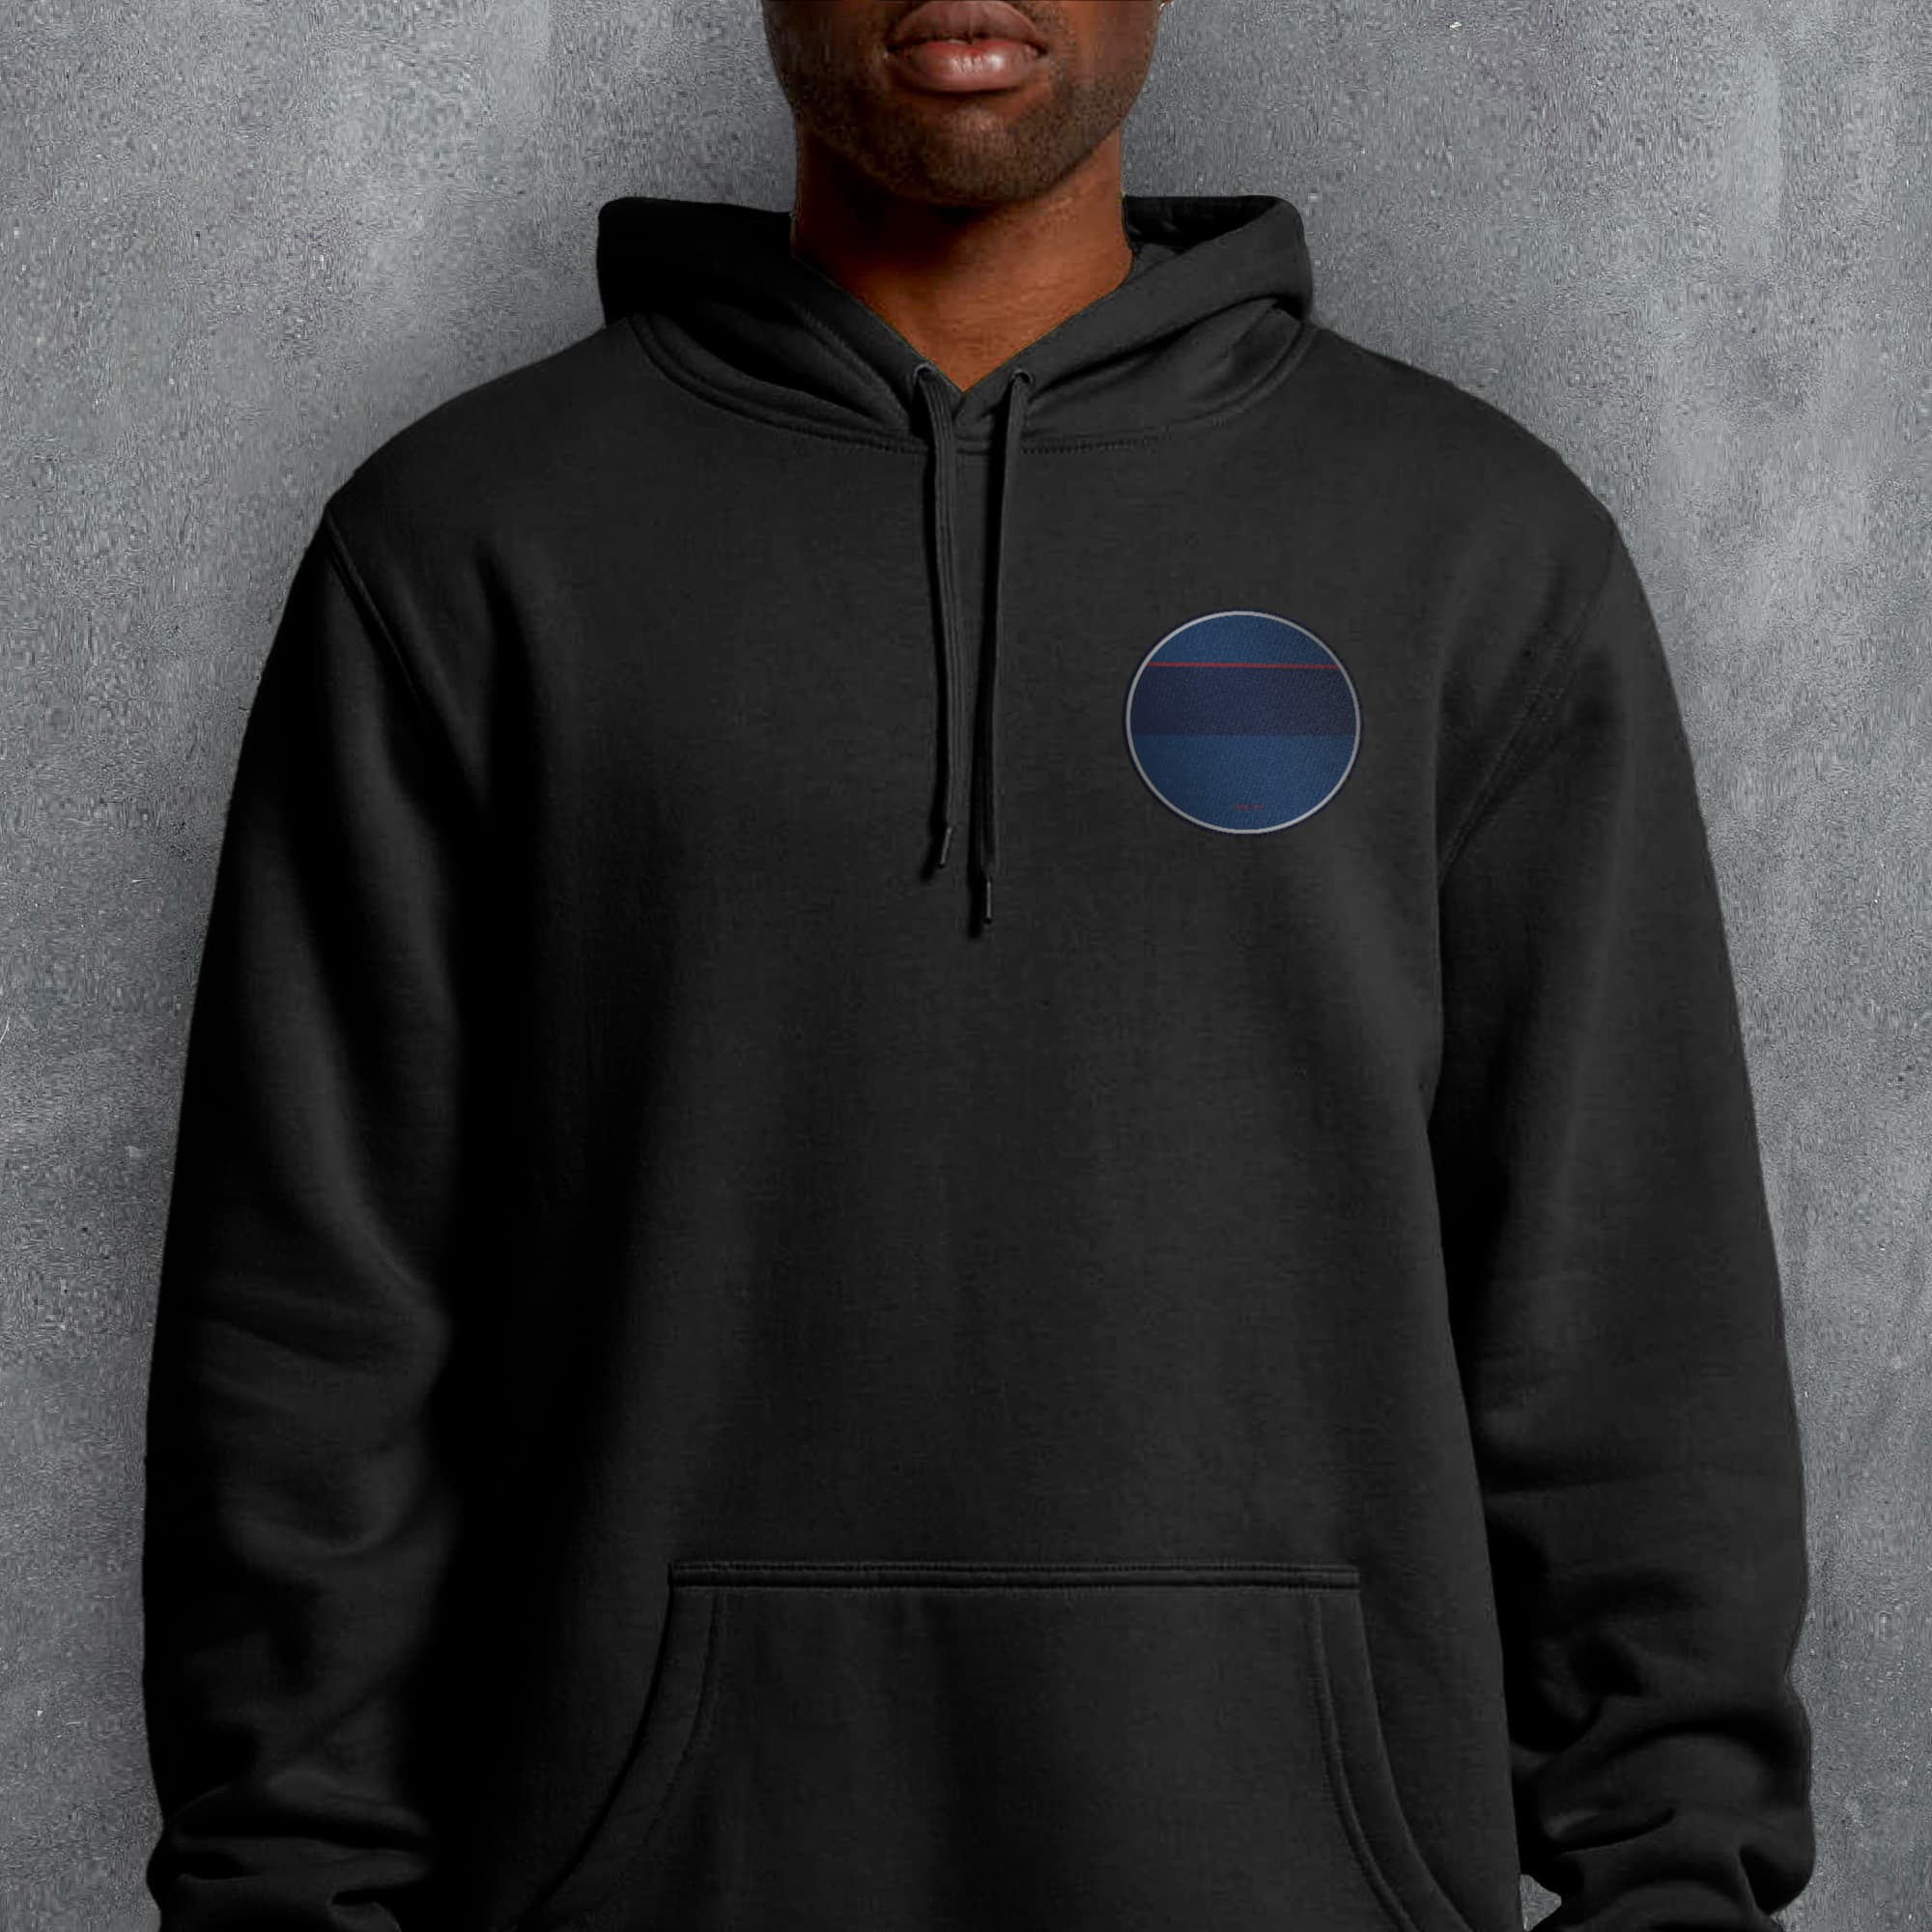 a man wearing a black hoodie with a blue circle on it